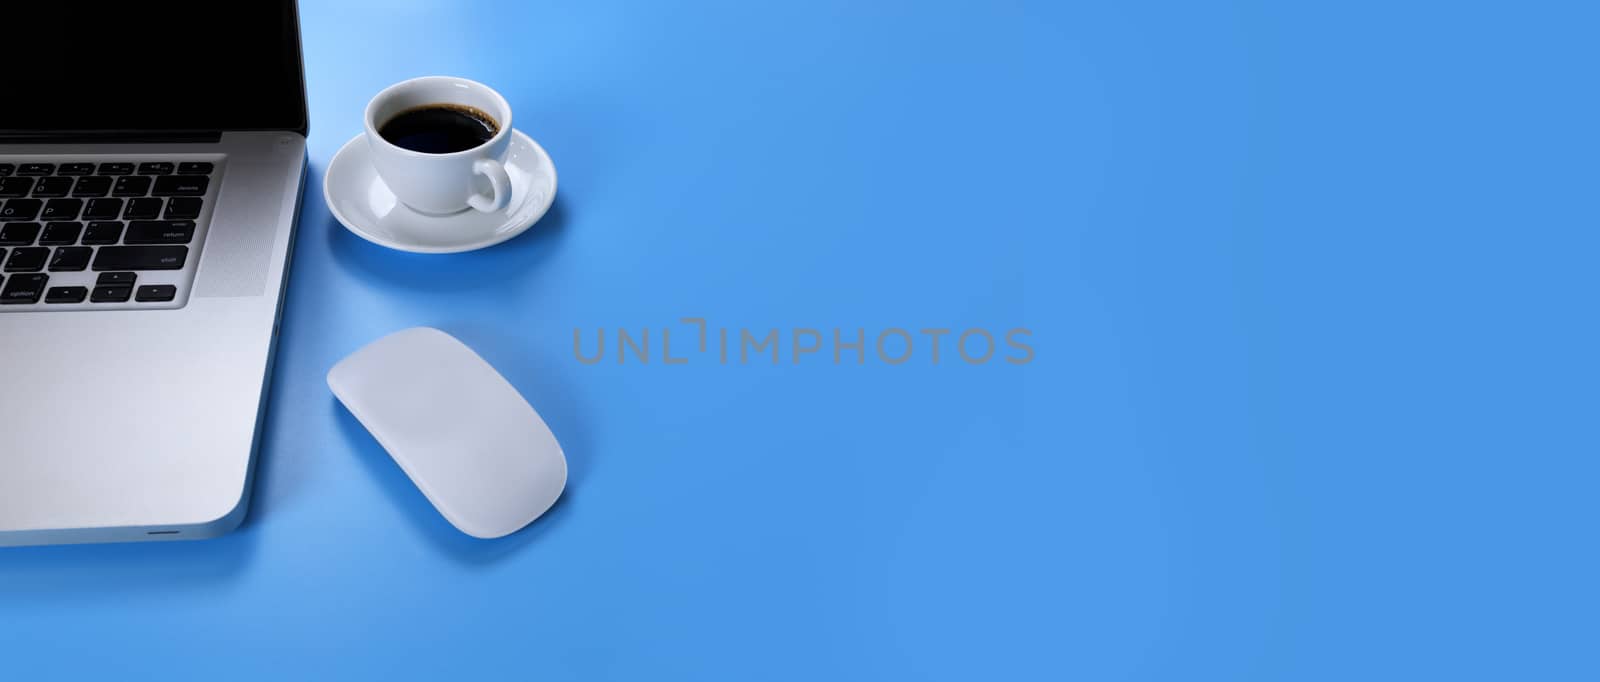 Laptop, mouse coffee on blue background. Laptop, mobile phone, black coffee isolated on blue background with copy space banner. Business concept.